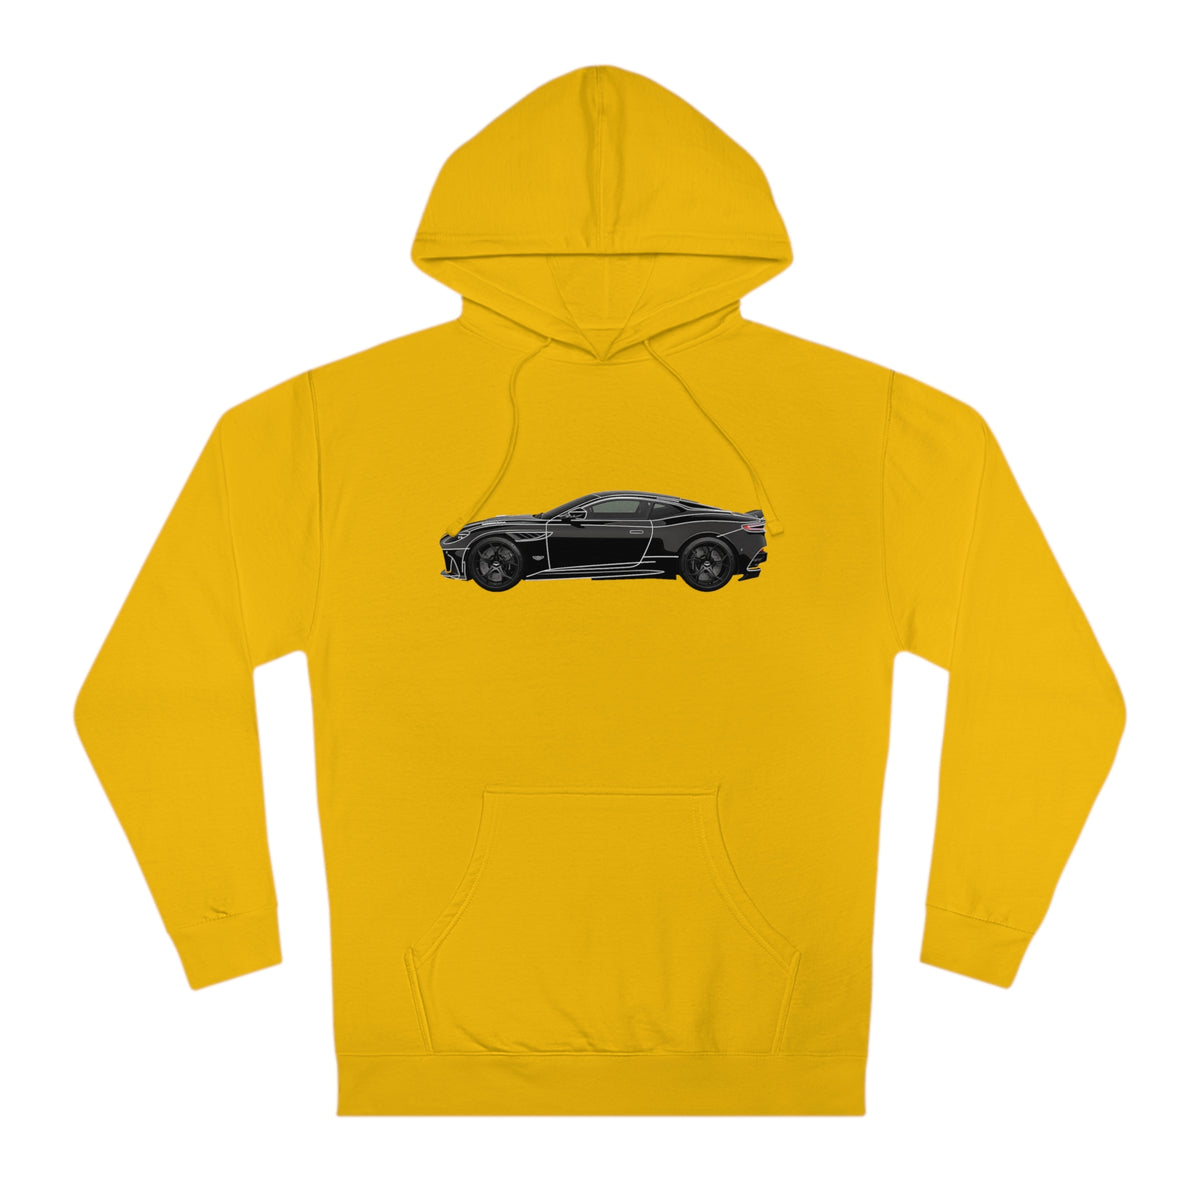 Stealth Mode Men's Hoodie with Aston Martin Outline Graphic Hooded Sweatshirt